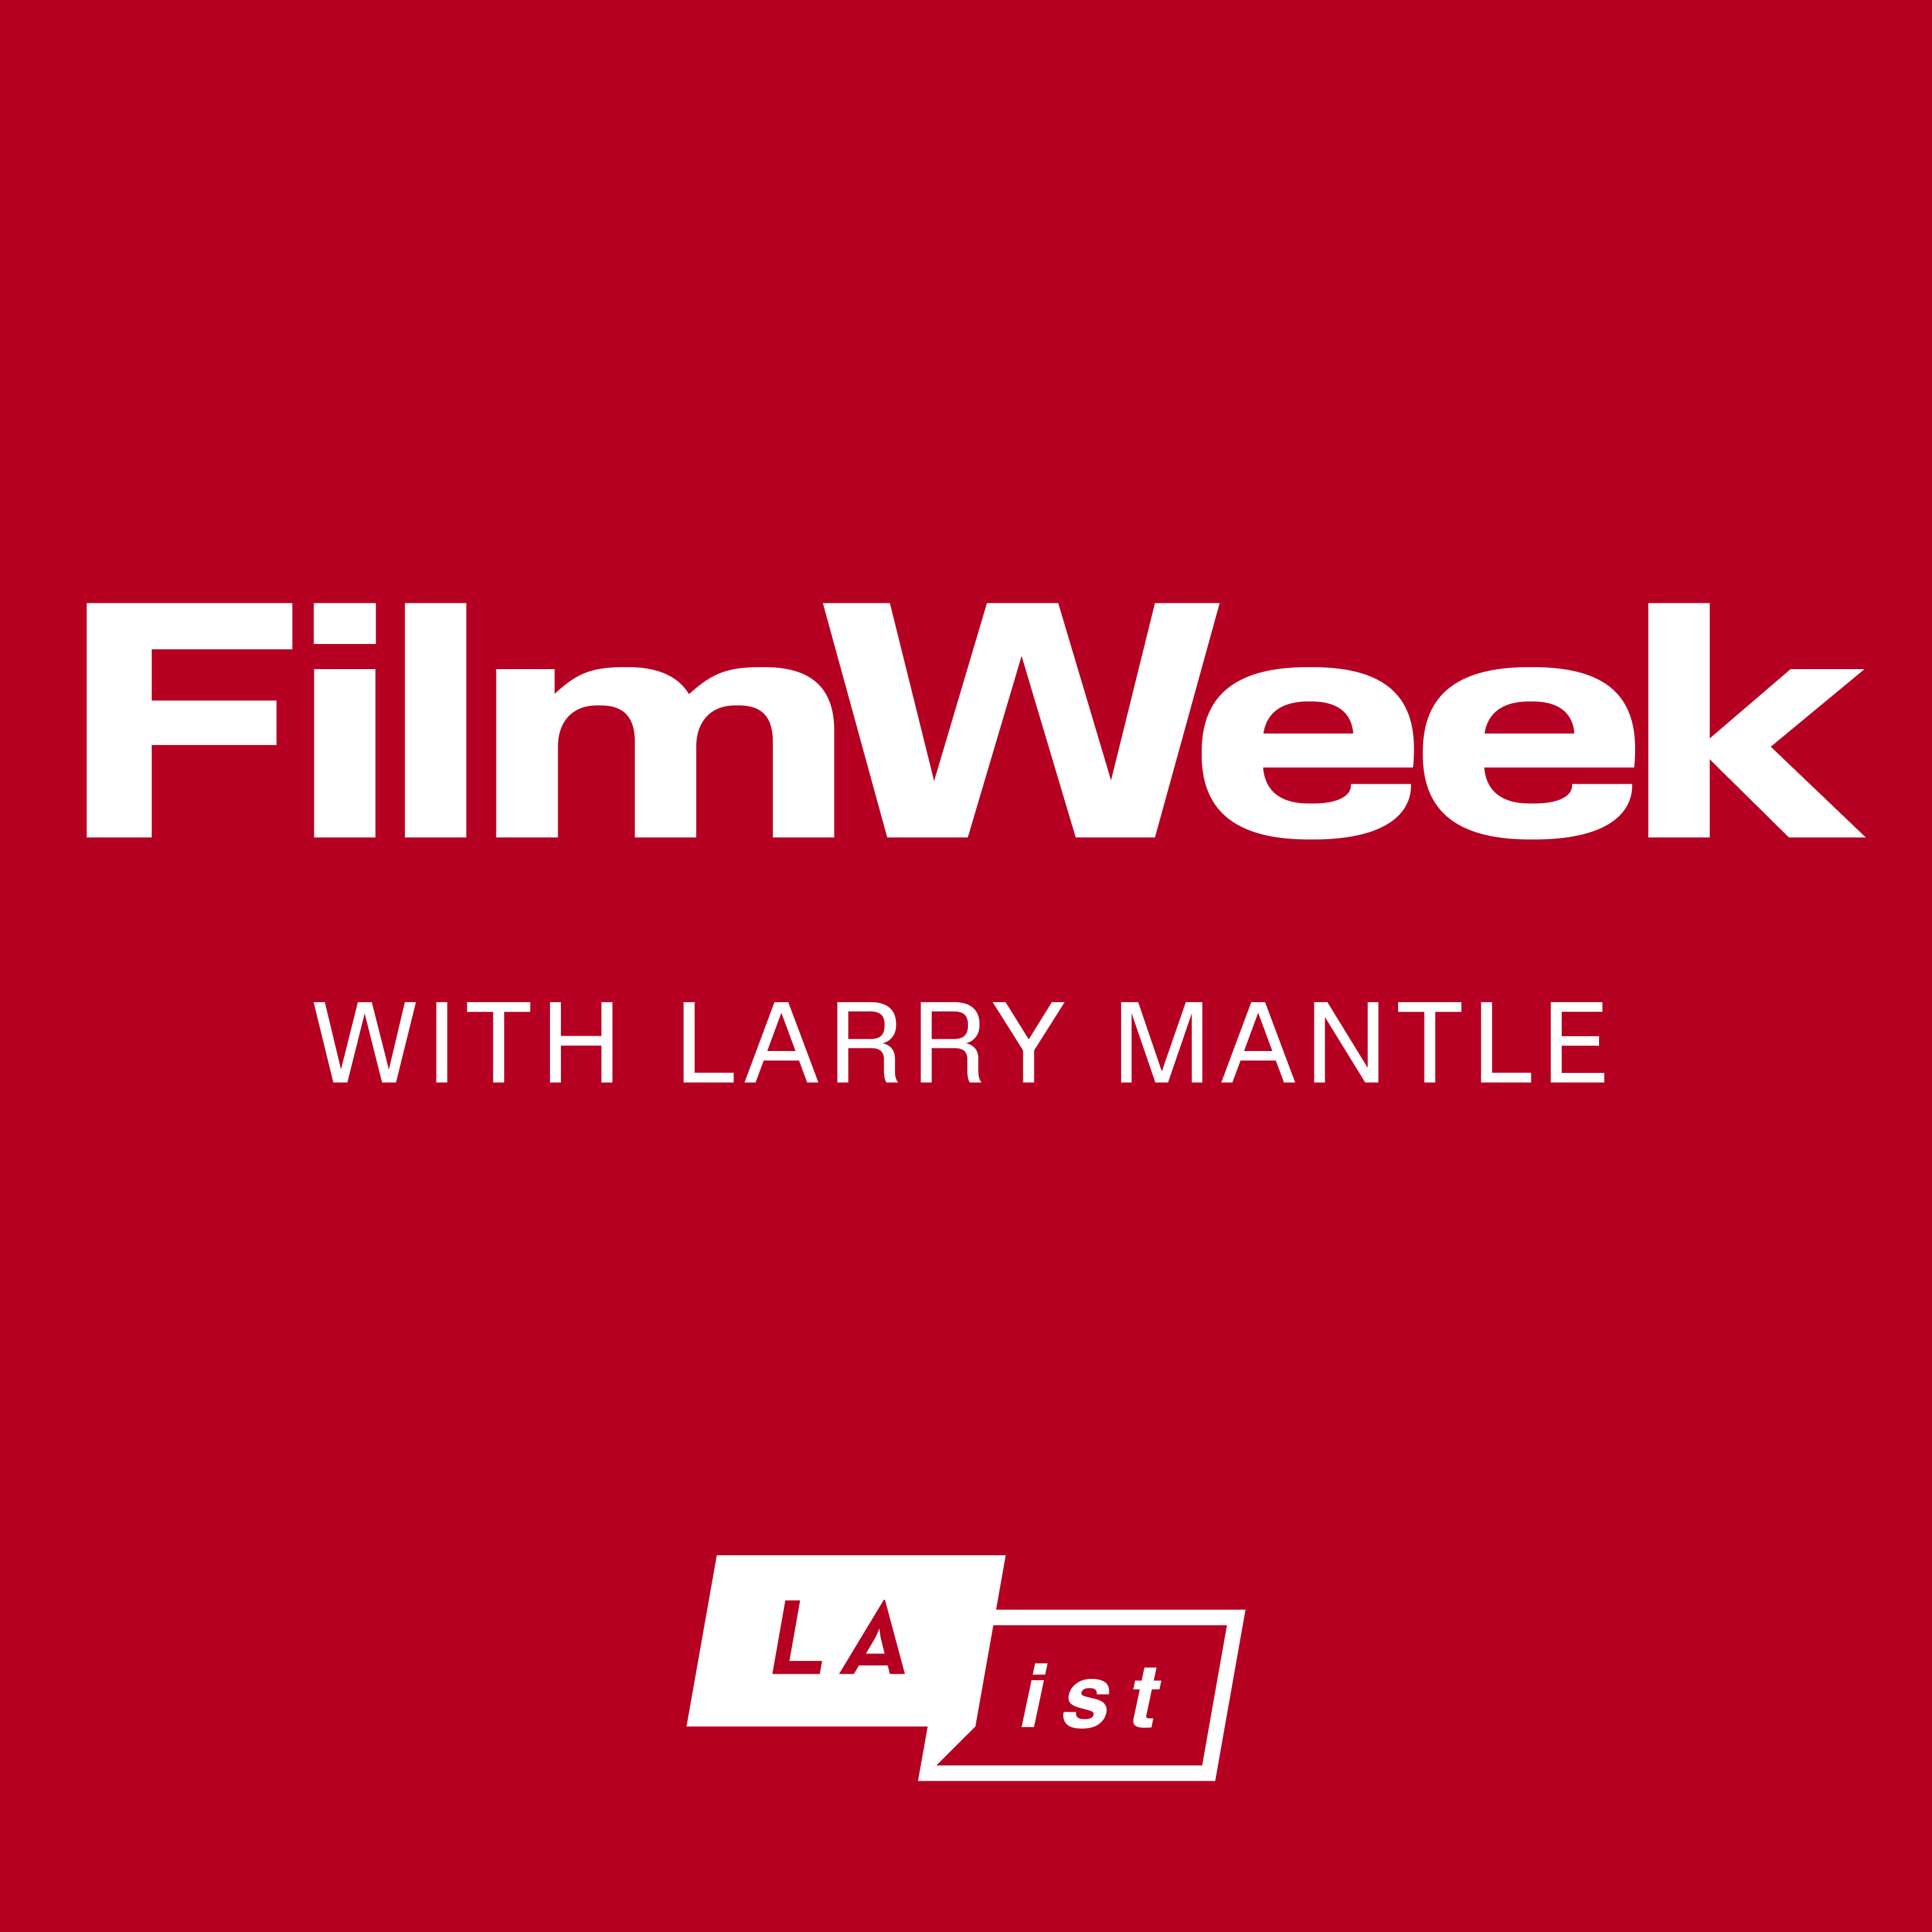 FilmWeek Feature: Larry Mantle And The FilmWeek Critics Discuss The Best International Feature Category Ahead Of The 96th Academy Awards Ceremony